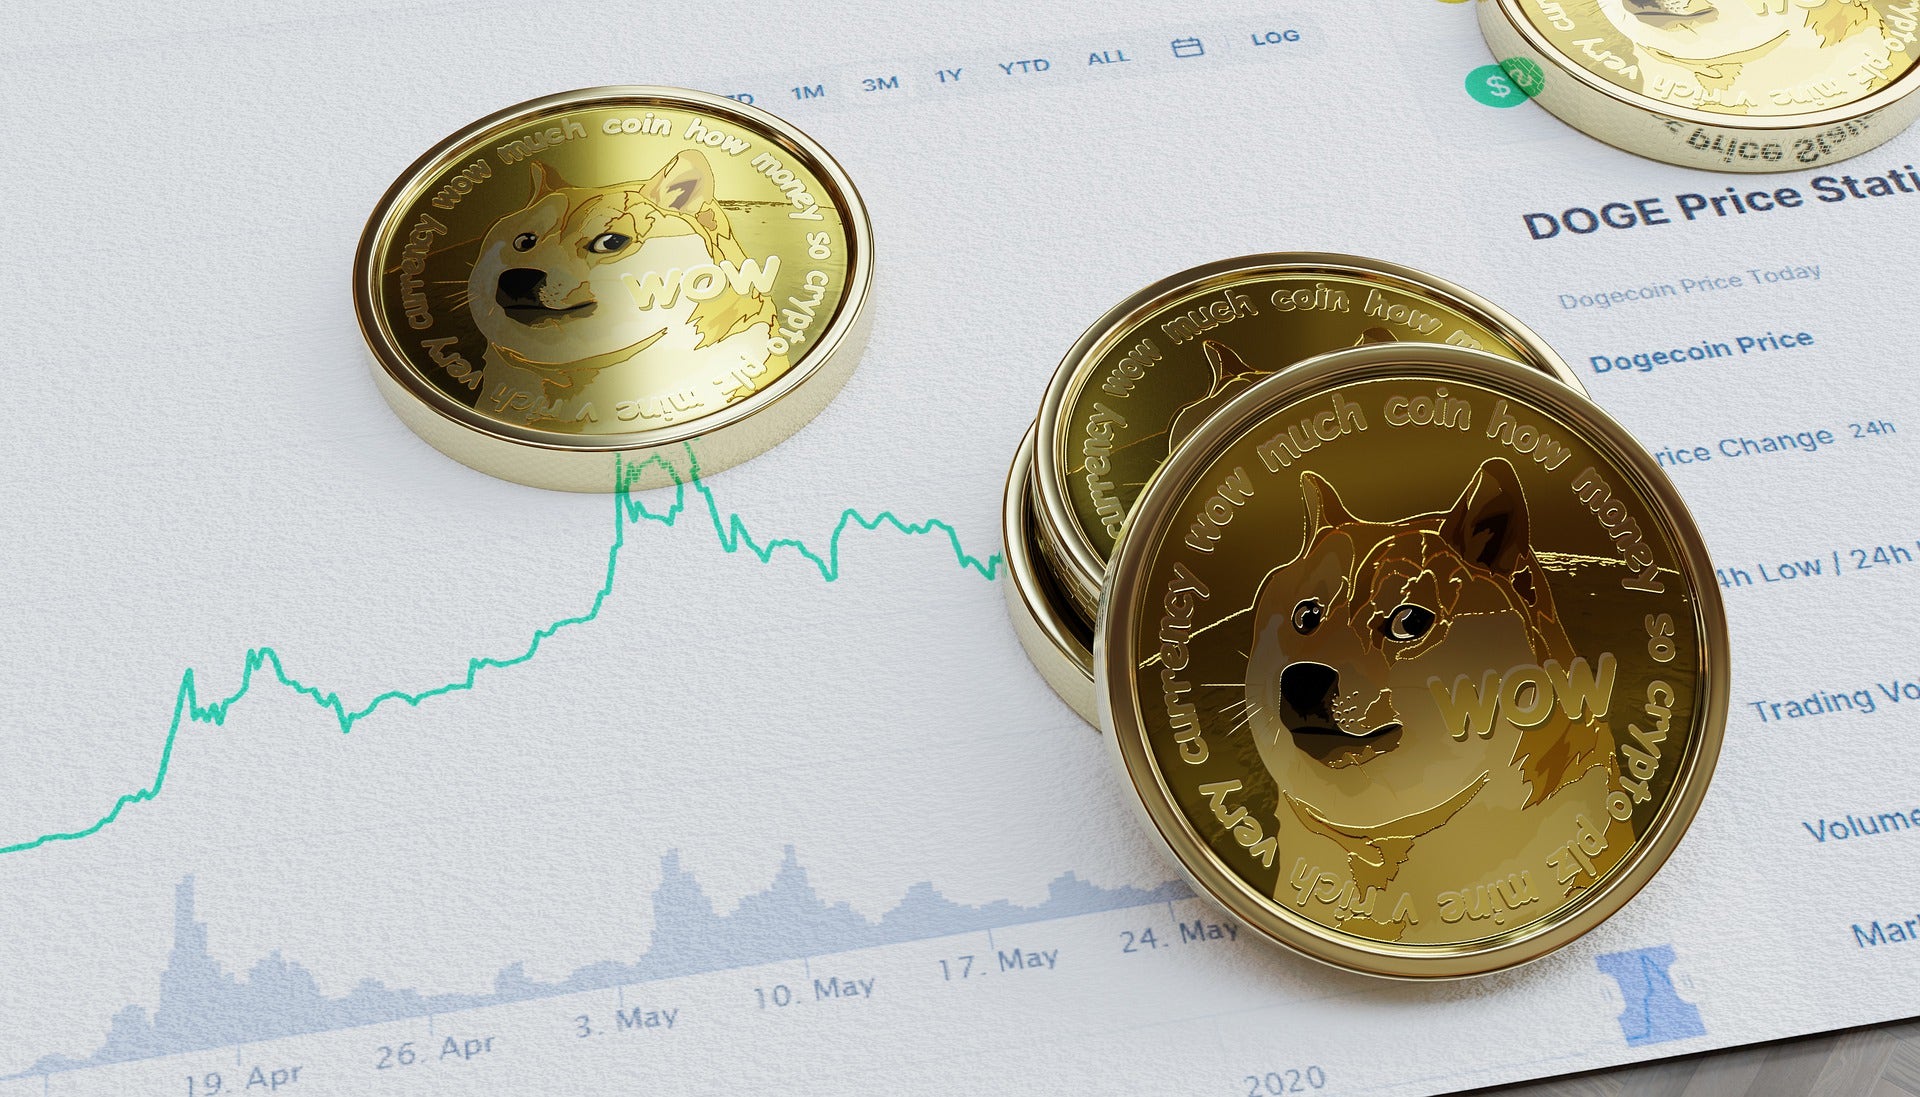 Dogecoin Falls Lower As Markets Shake Investors: Why The Crypto Must Hold This Key Level